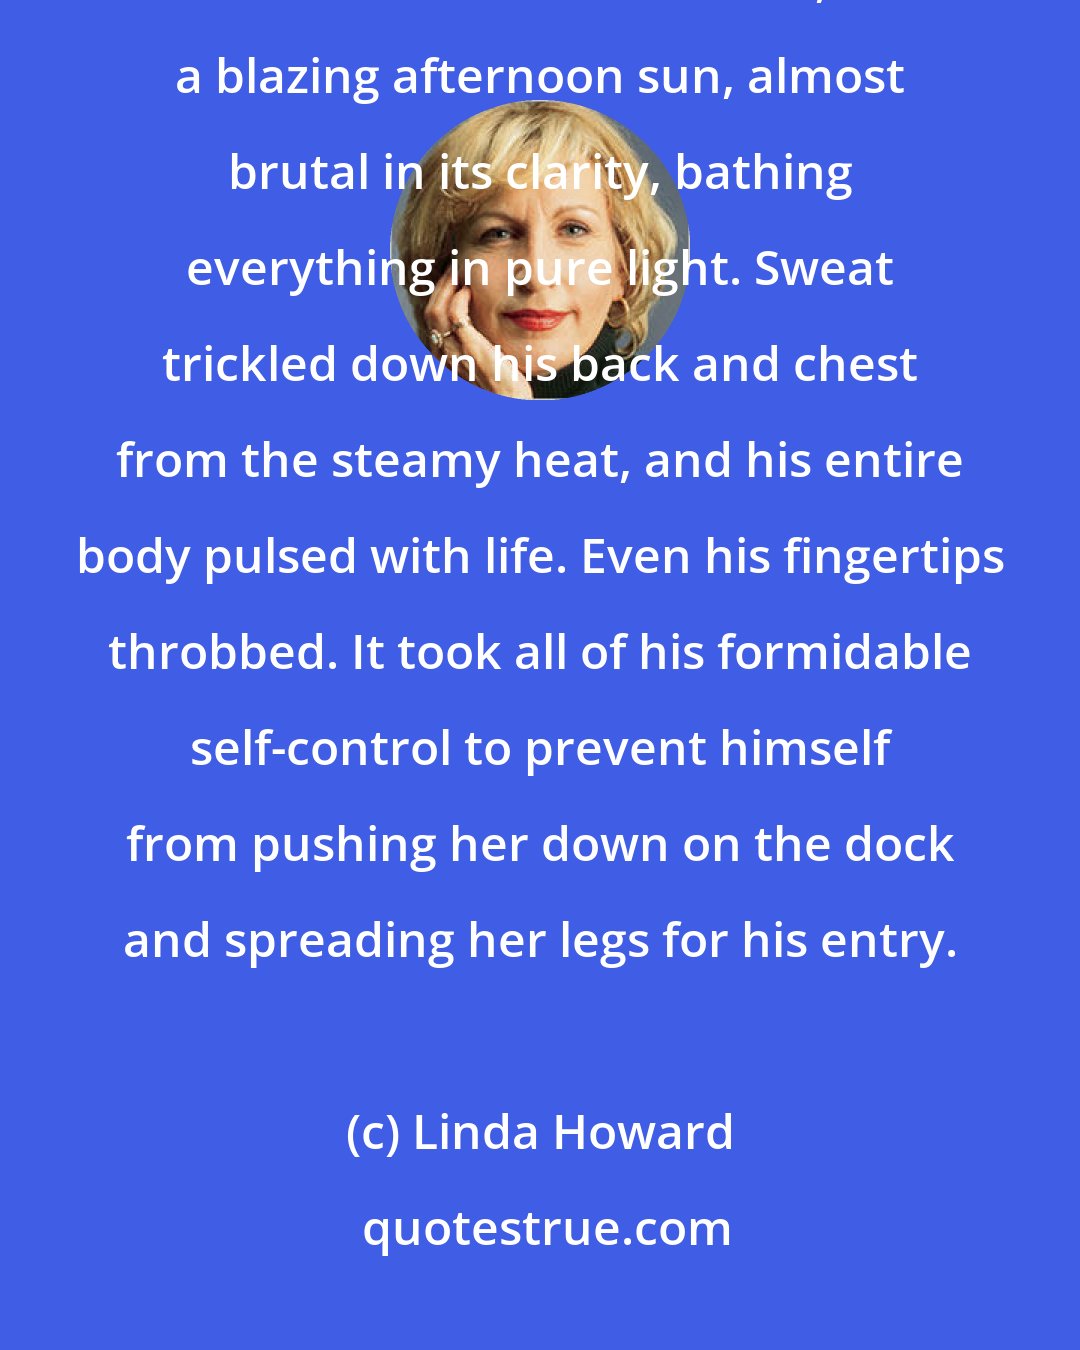 Linda Howard: But never had he felt more enthralled than he was right now, sitting beside Evie on a weathered old dock, with a blazing afternoon sun, almost brutal in its clarity, bathing everything in pure light. Sweat trickled down his back and chest from the steamy heat, and his entire body pulsed with life. Even his fingertips throbbed. It took all of his formidable self-control to prevent himself from pushing her down on the dock and spreading her legs for his entry.